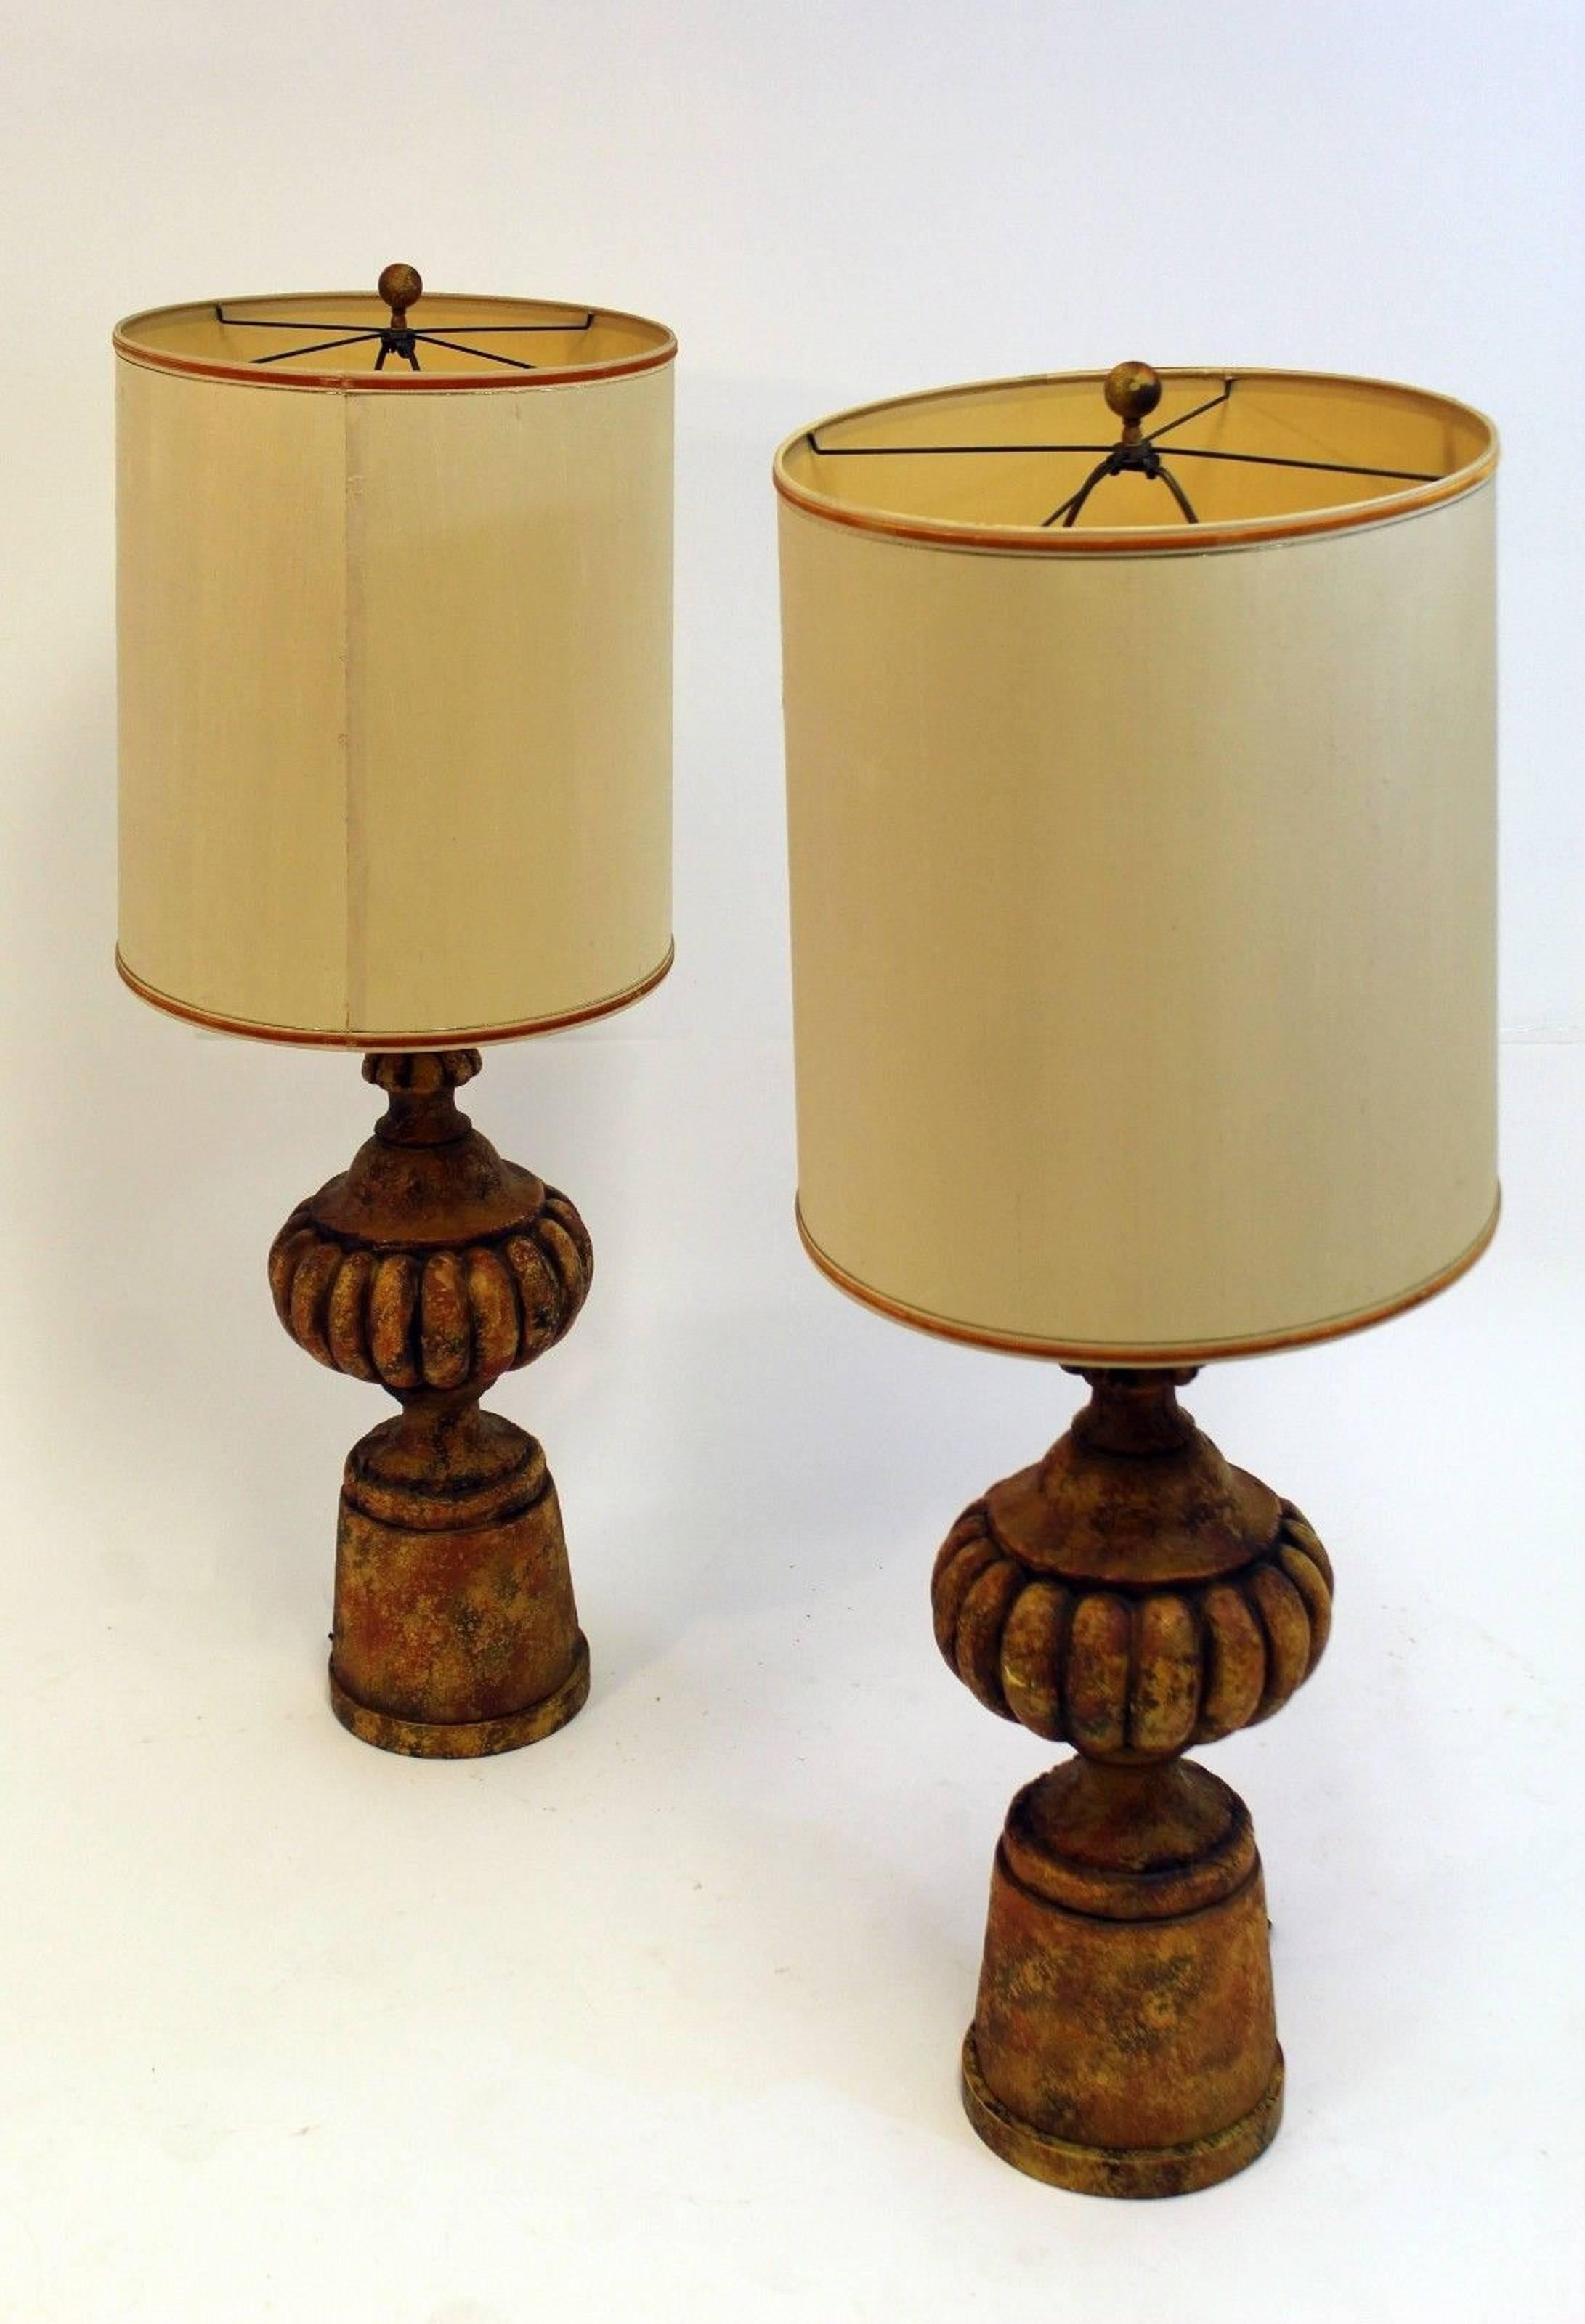 For your consideration is a pair of Michael Taylor for Chapman lamps. They are cast composite stone and gesso finish. Original shades and finial. In excellent condition.

Dimensions are height 46